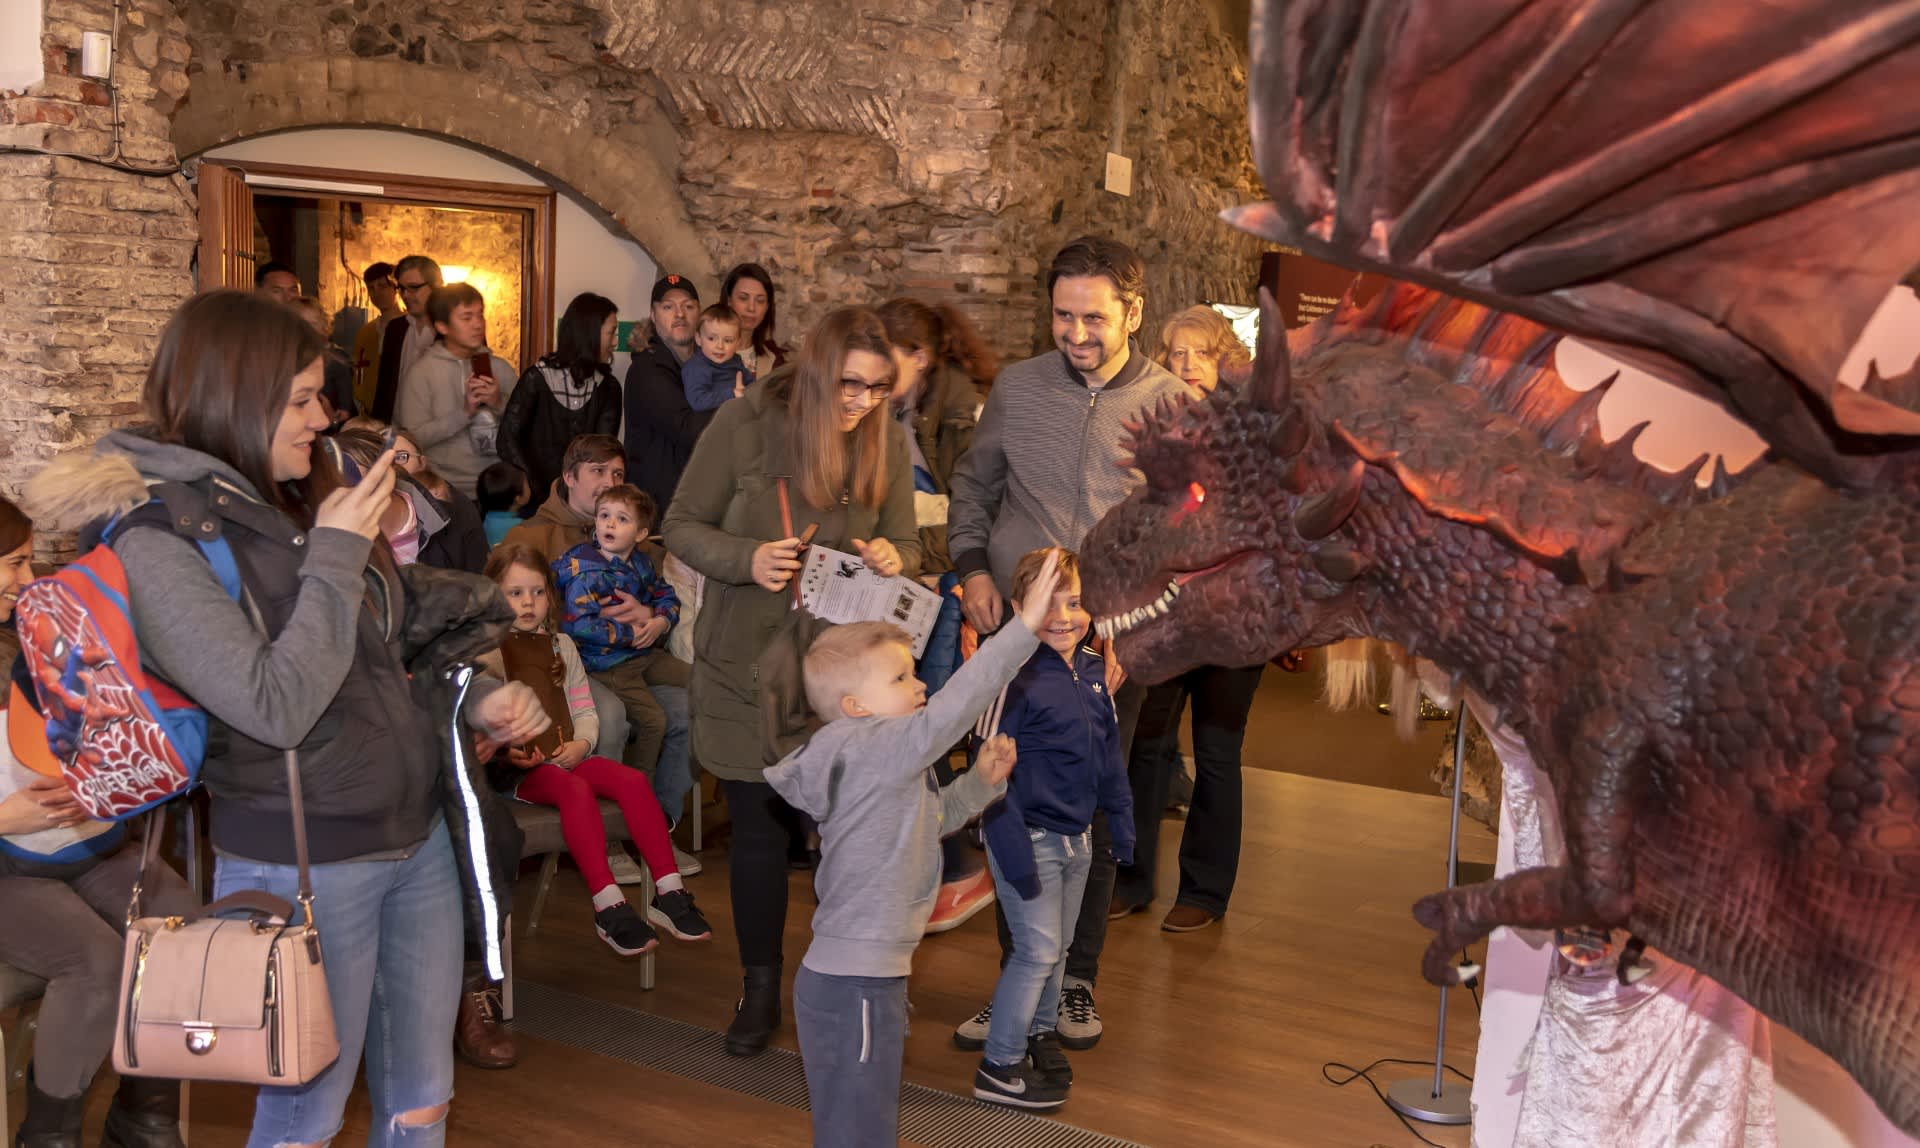 A child touches a dragon in Colchester Castle, surrounded by friends and family.